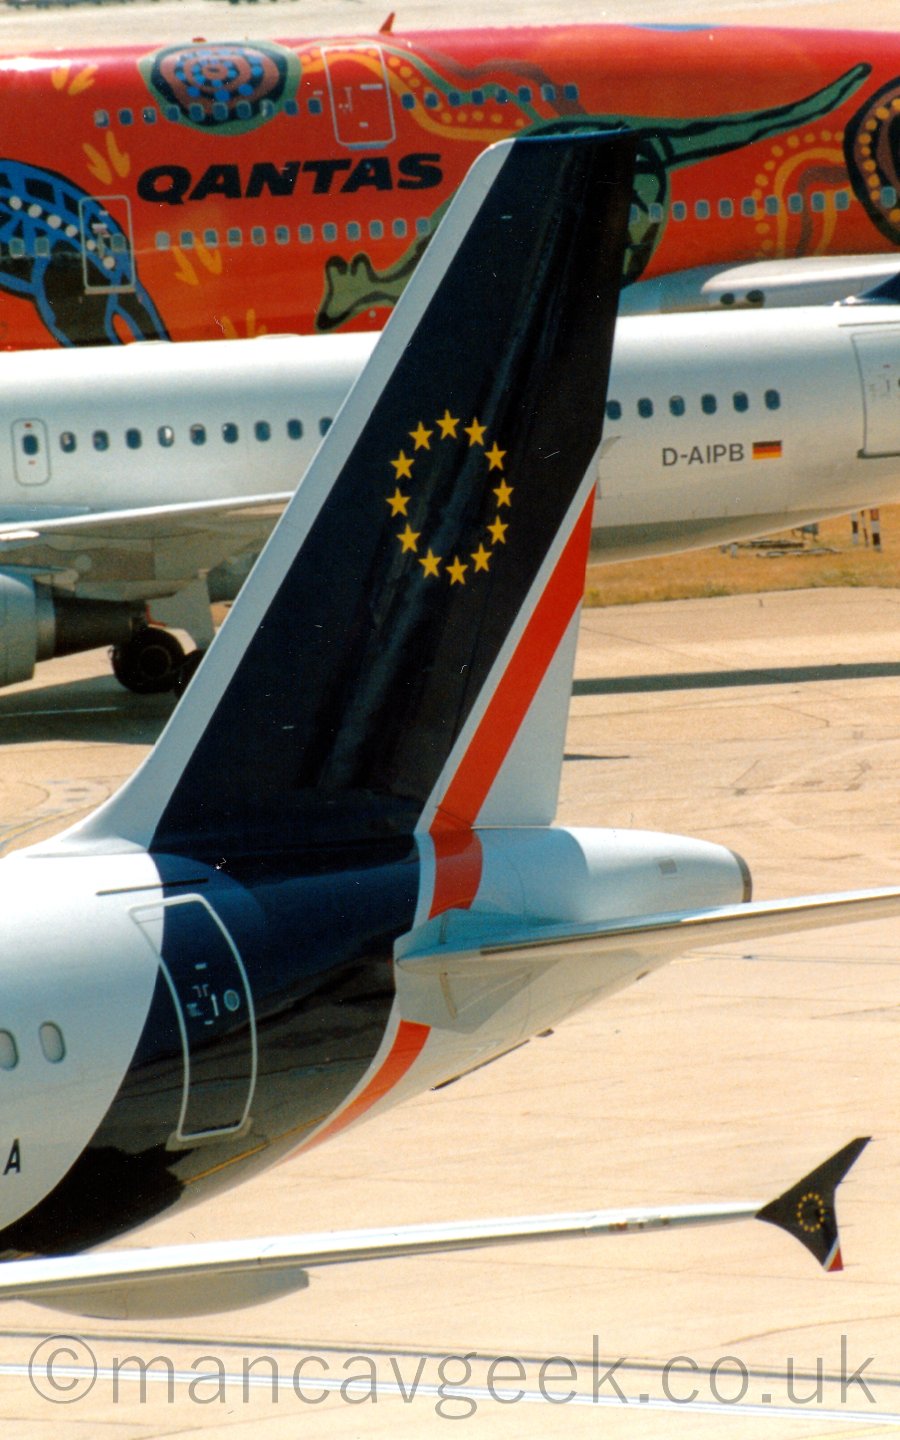 Closeup of the tail of a twin engined jet airliner parked facing to the left. the planes body is mostly white, with a thick dark blue and thin red band running round the rear fuselage and up in to the tail, where there is a circle of 12 5-pointed gold stars. The same design is visible on the planes upturned wingtips, at the bottom of the frame. Strong sunlight is casting strong shadows, and causing bright reflections on the upper surfaces. In the background, a white jet airliner and another, much larger, orange jet airliner are passing through the image.